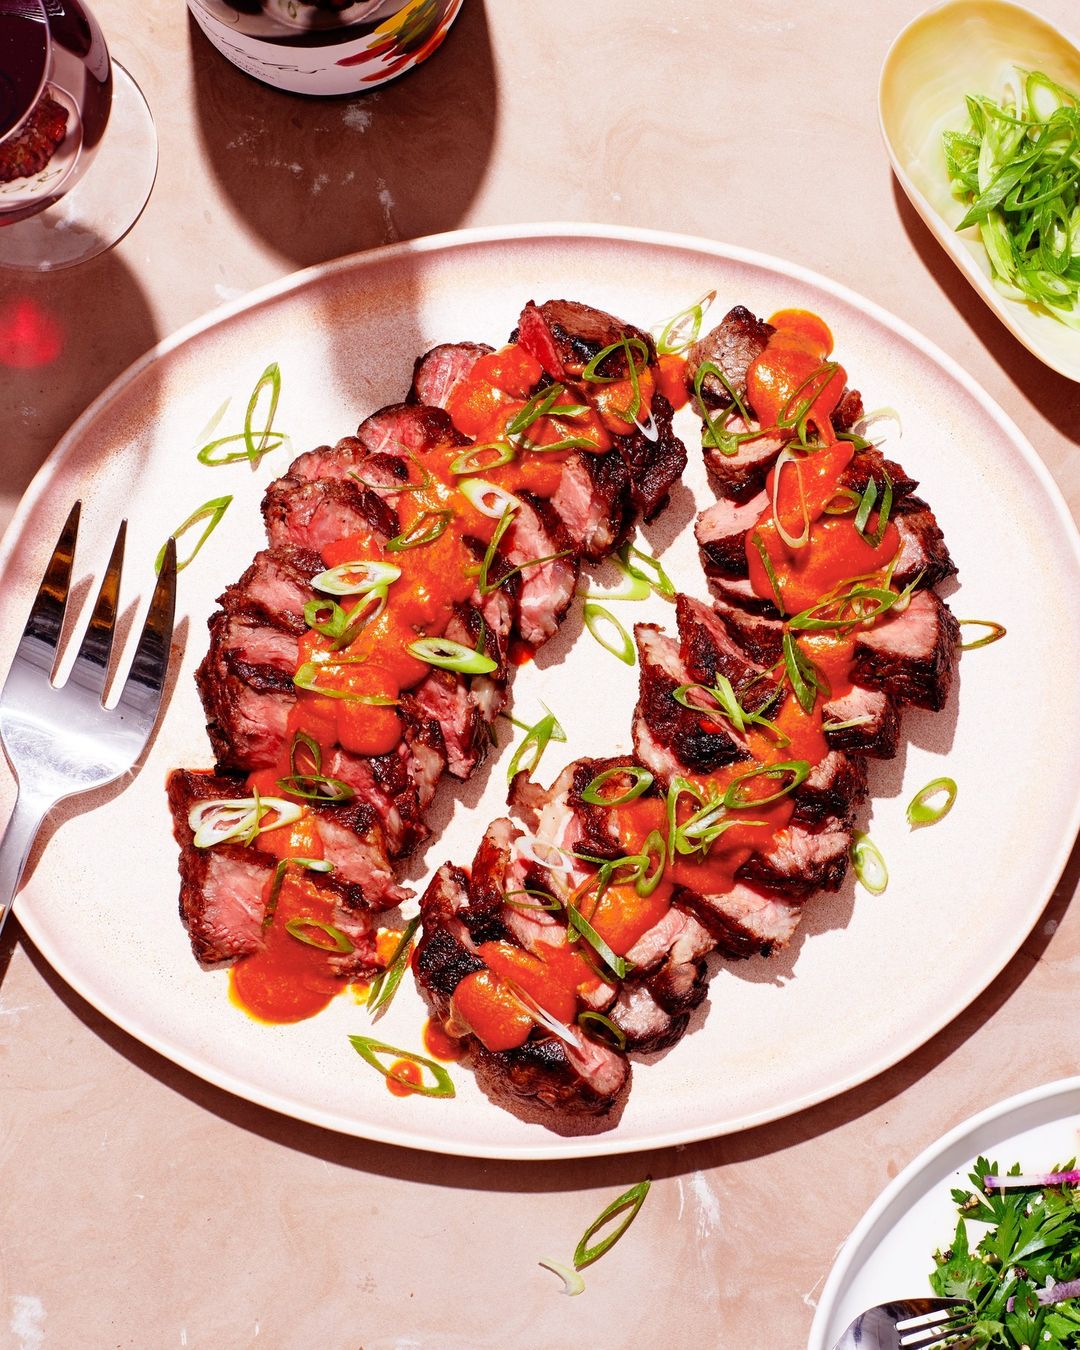 20 Yummy Steak Recipes You'll Want to Serve for Dinner Tonight ...